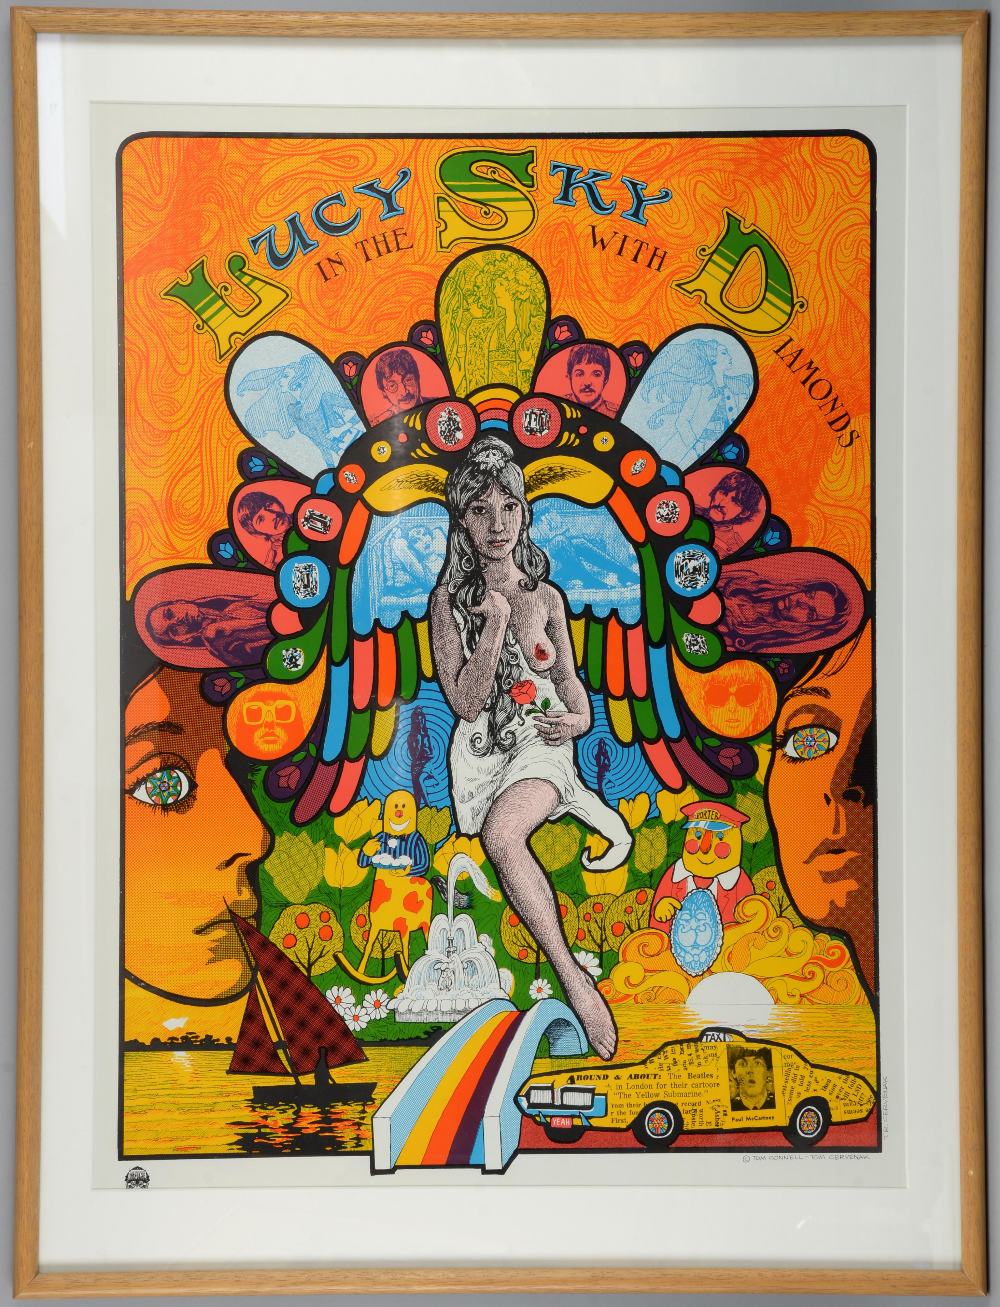 The Beatles, Lucy In The Sky With Diamonds music poster, designed by Tom Connell & Tom Cervenak,